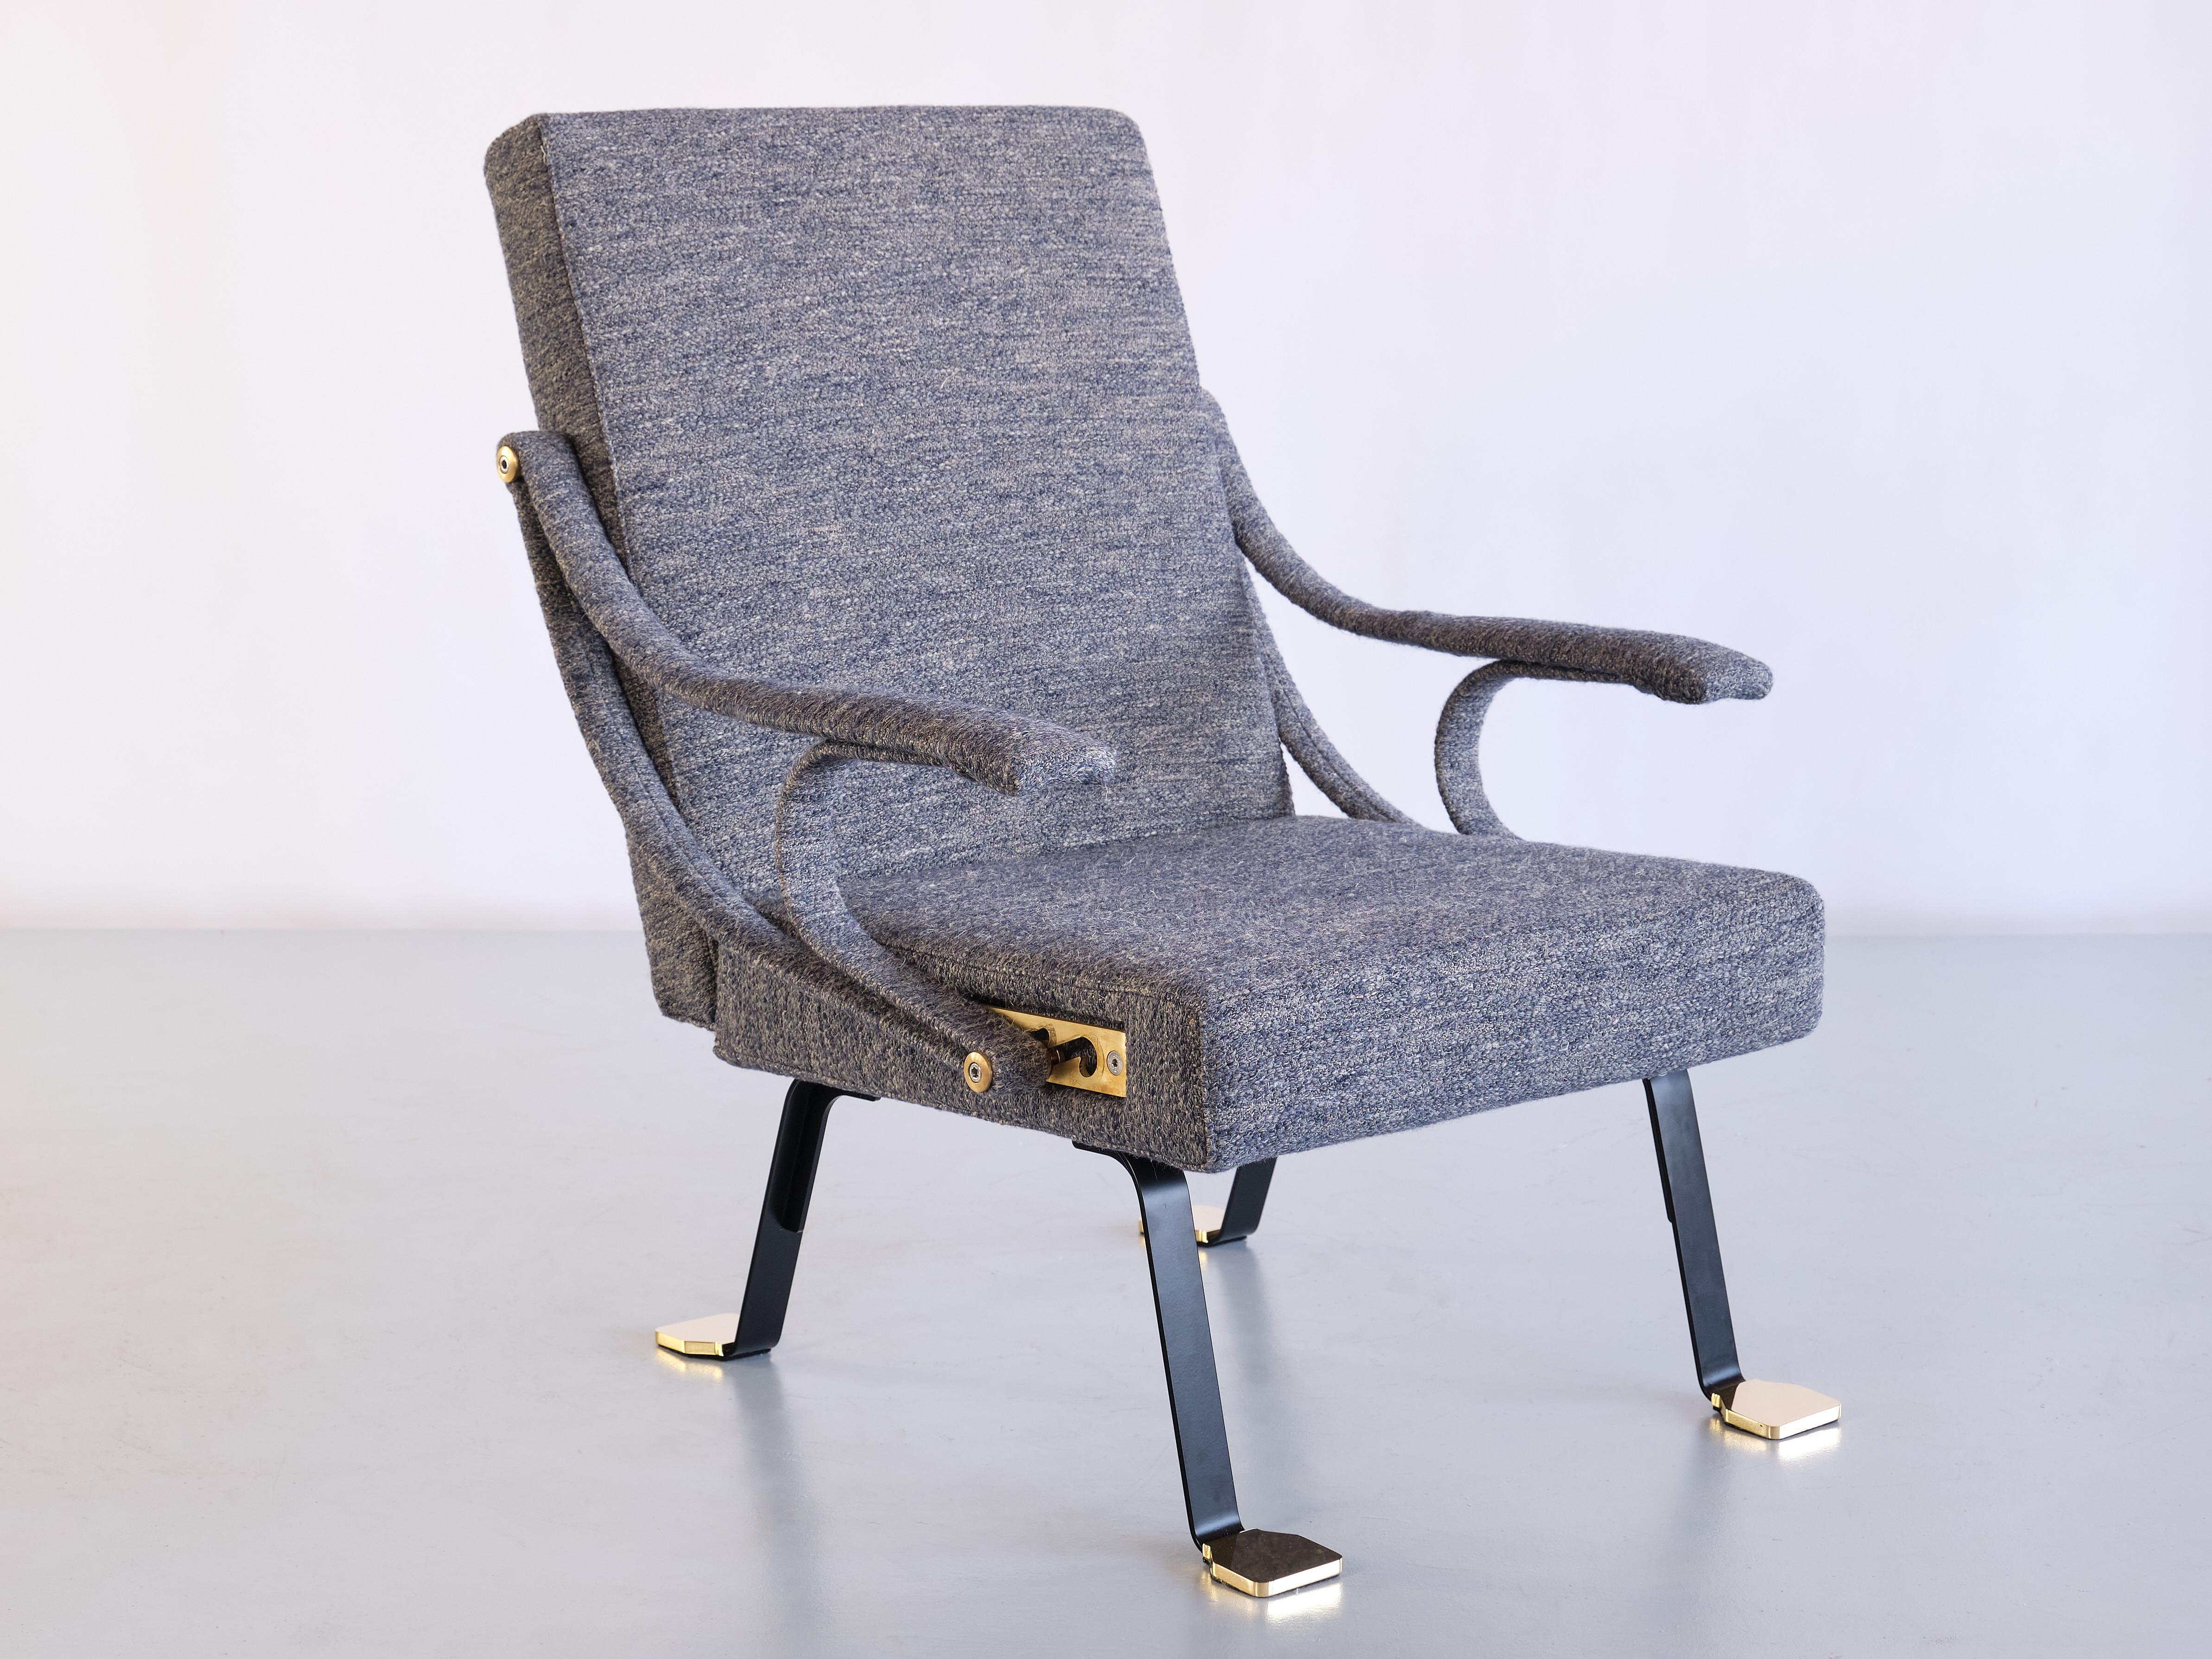 Designed by Ignazio Gardella in 1957, the Digamma lounge chair is a comfortable chair with roots in the late Italian modernist tradition.
Its rational construction features two geometric sections - the rectangular upholstered back and seat - bound